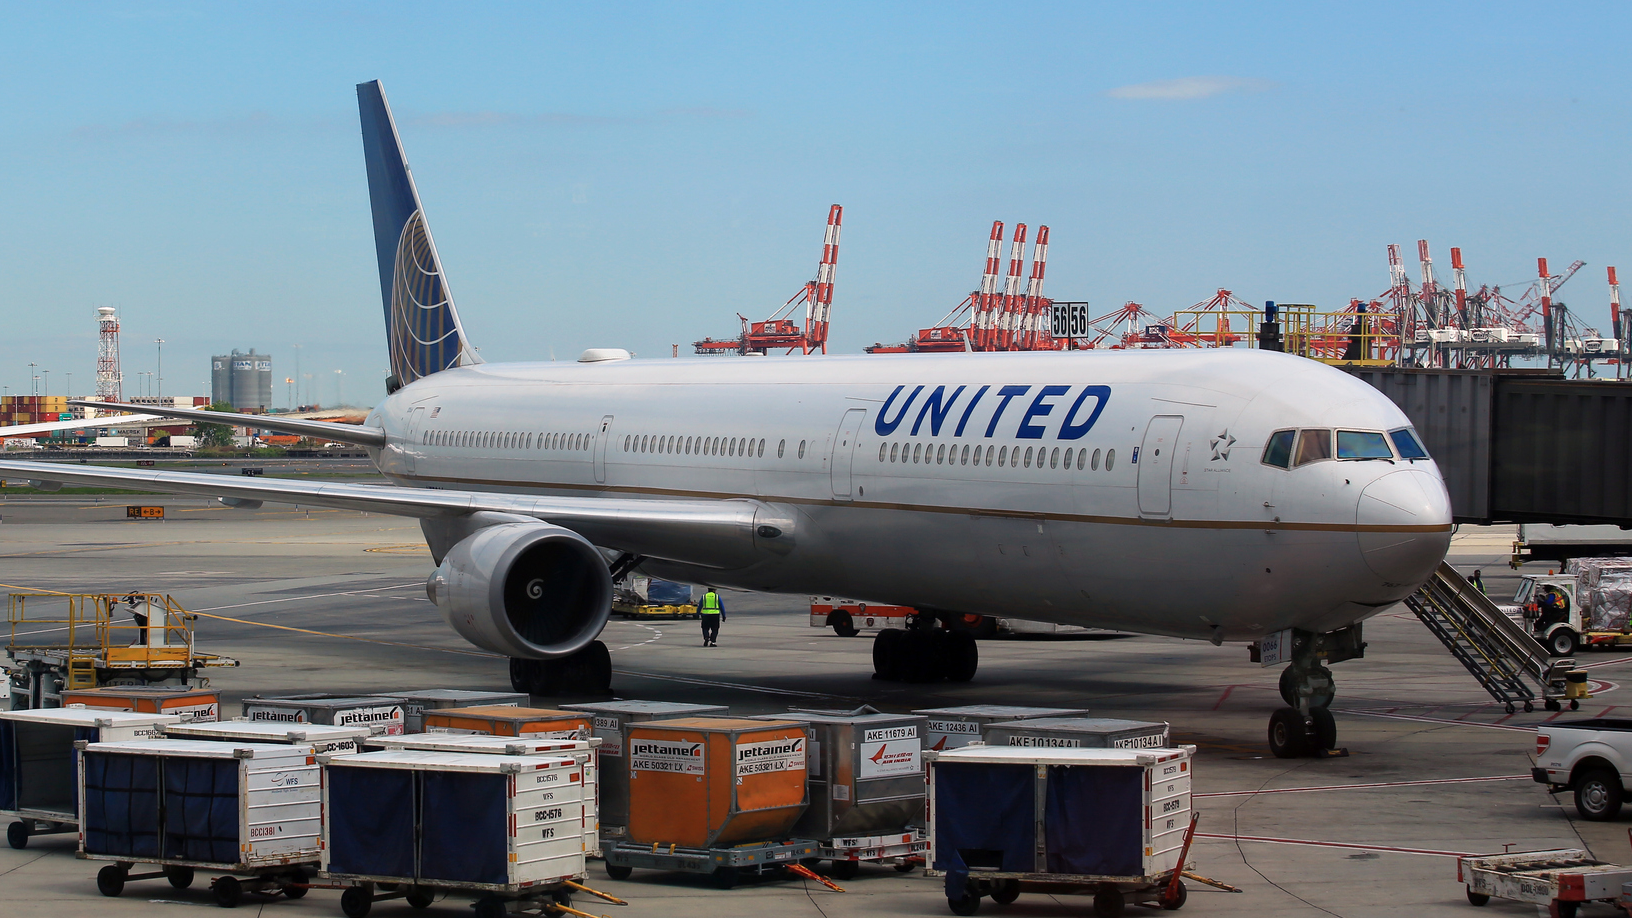 United Airlines passengers recall 'scary' Boeing 777 engine explosion - Fox News